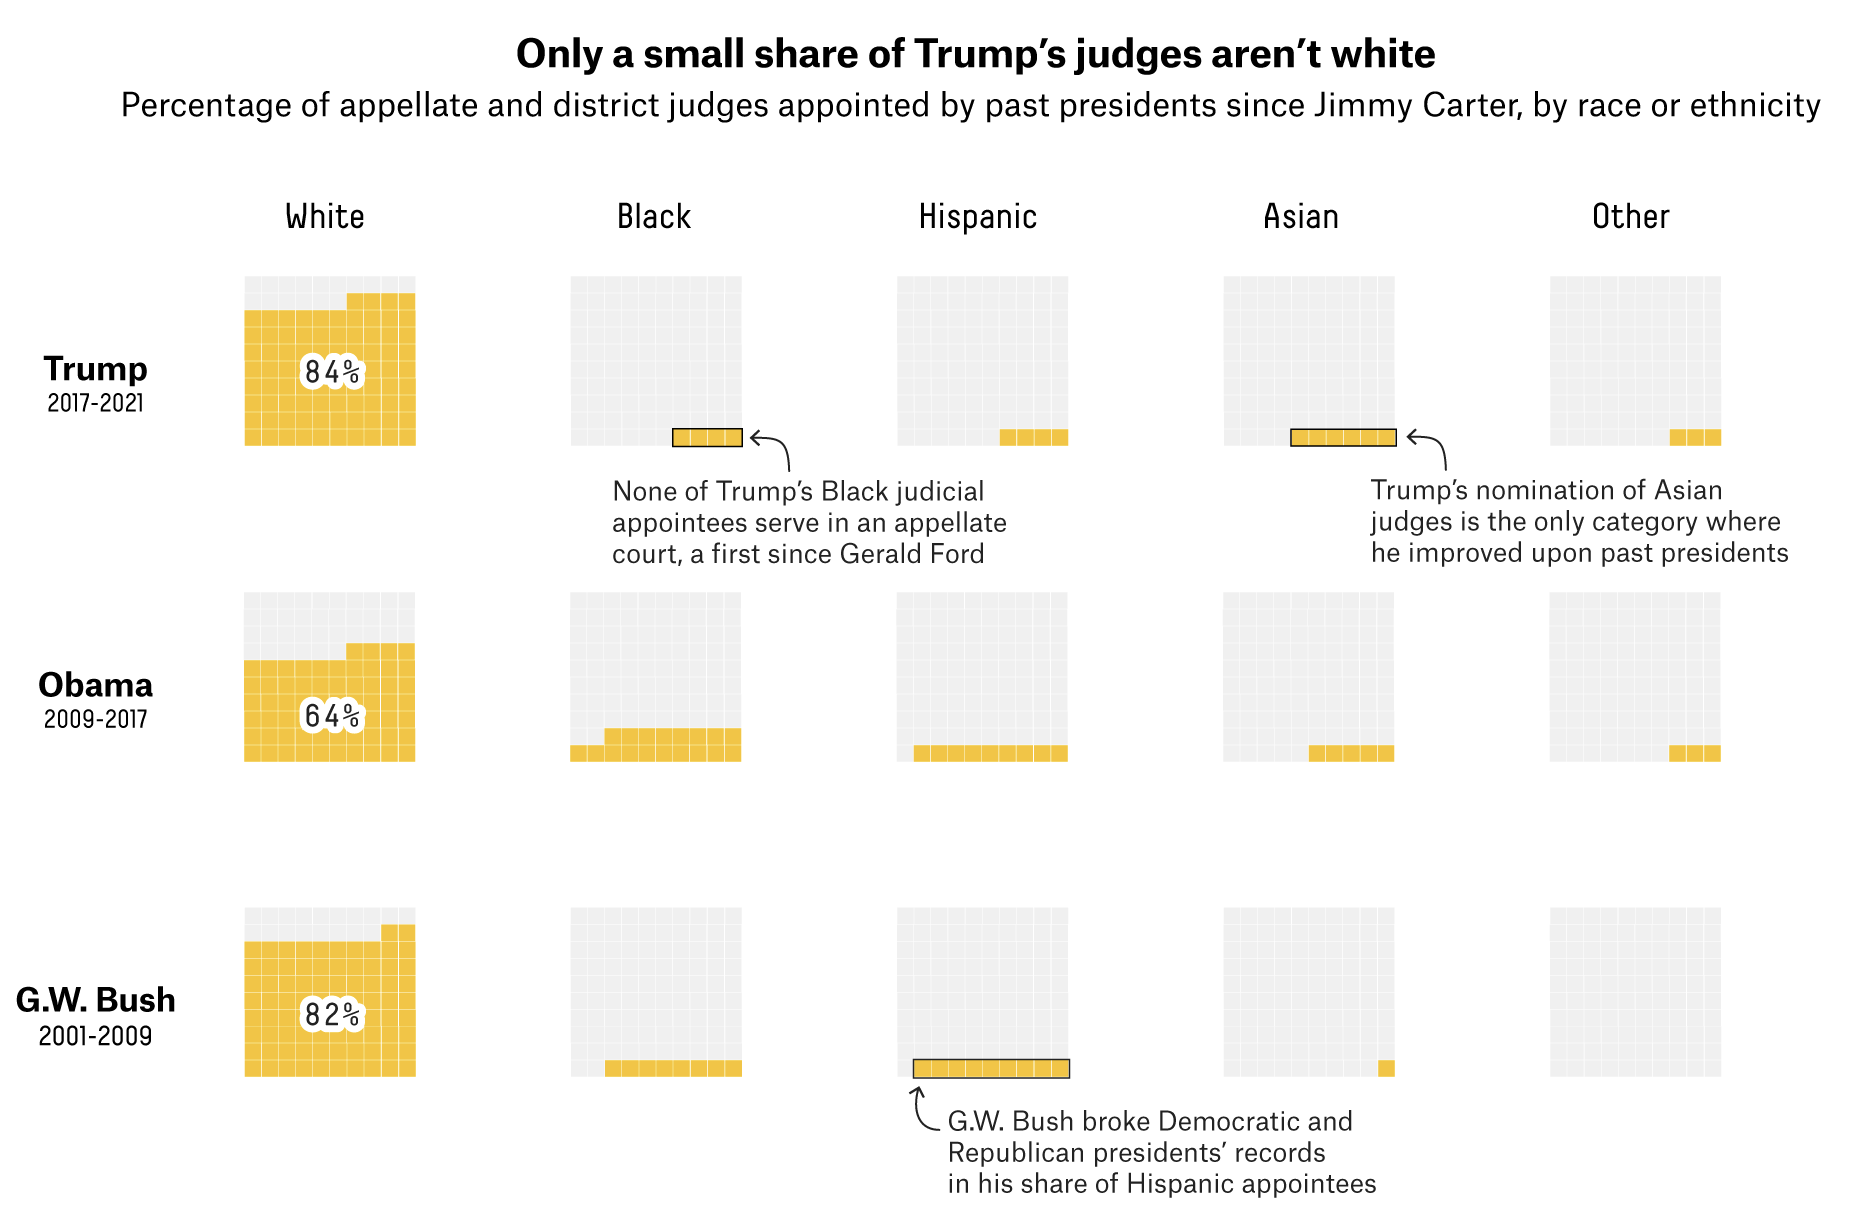 A comparison of the race of judges appointed by the presidents Trump, Obama and Bush, with a clear title, and clear annotations explaining the chart